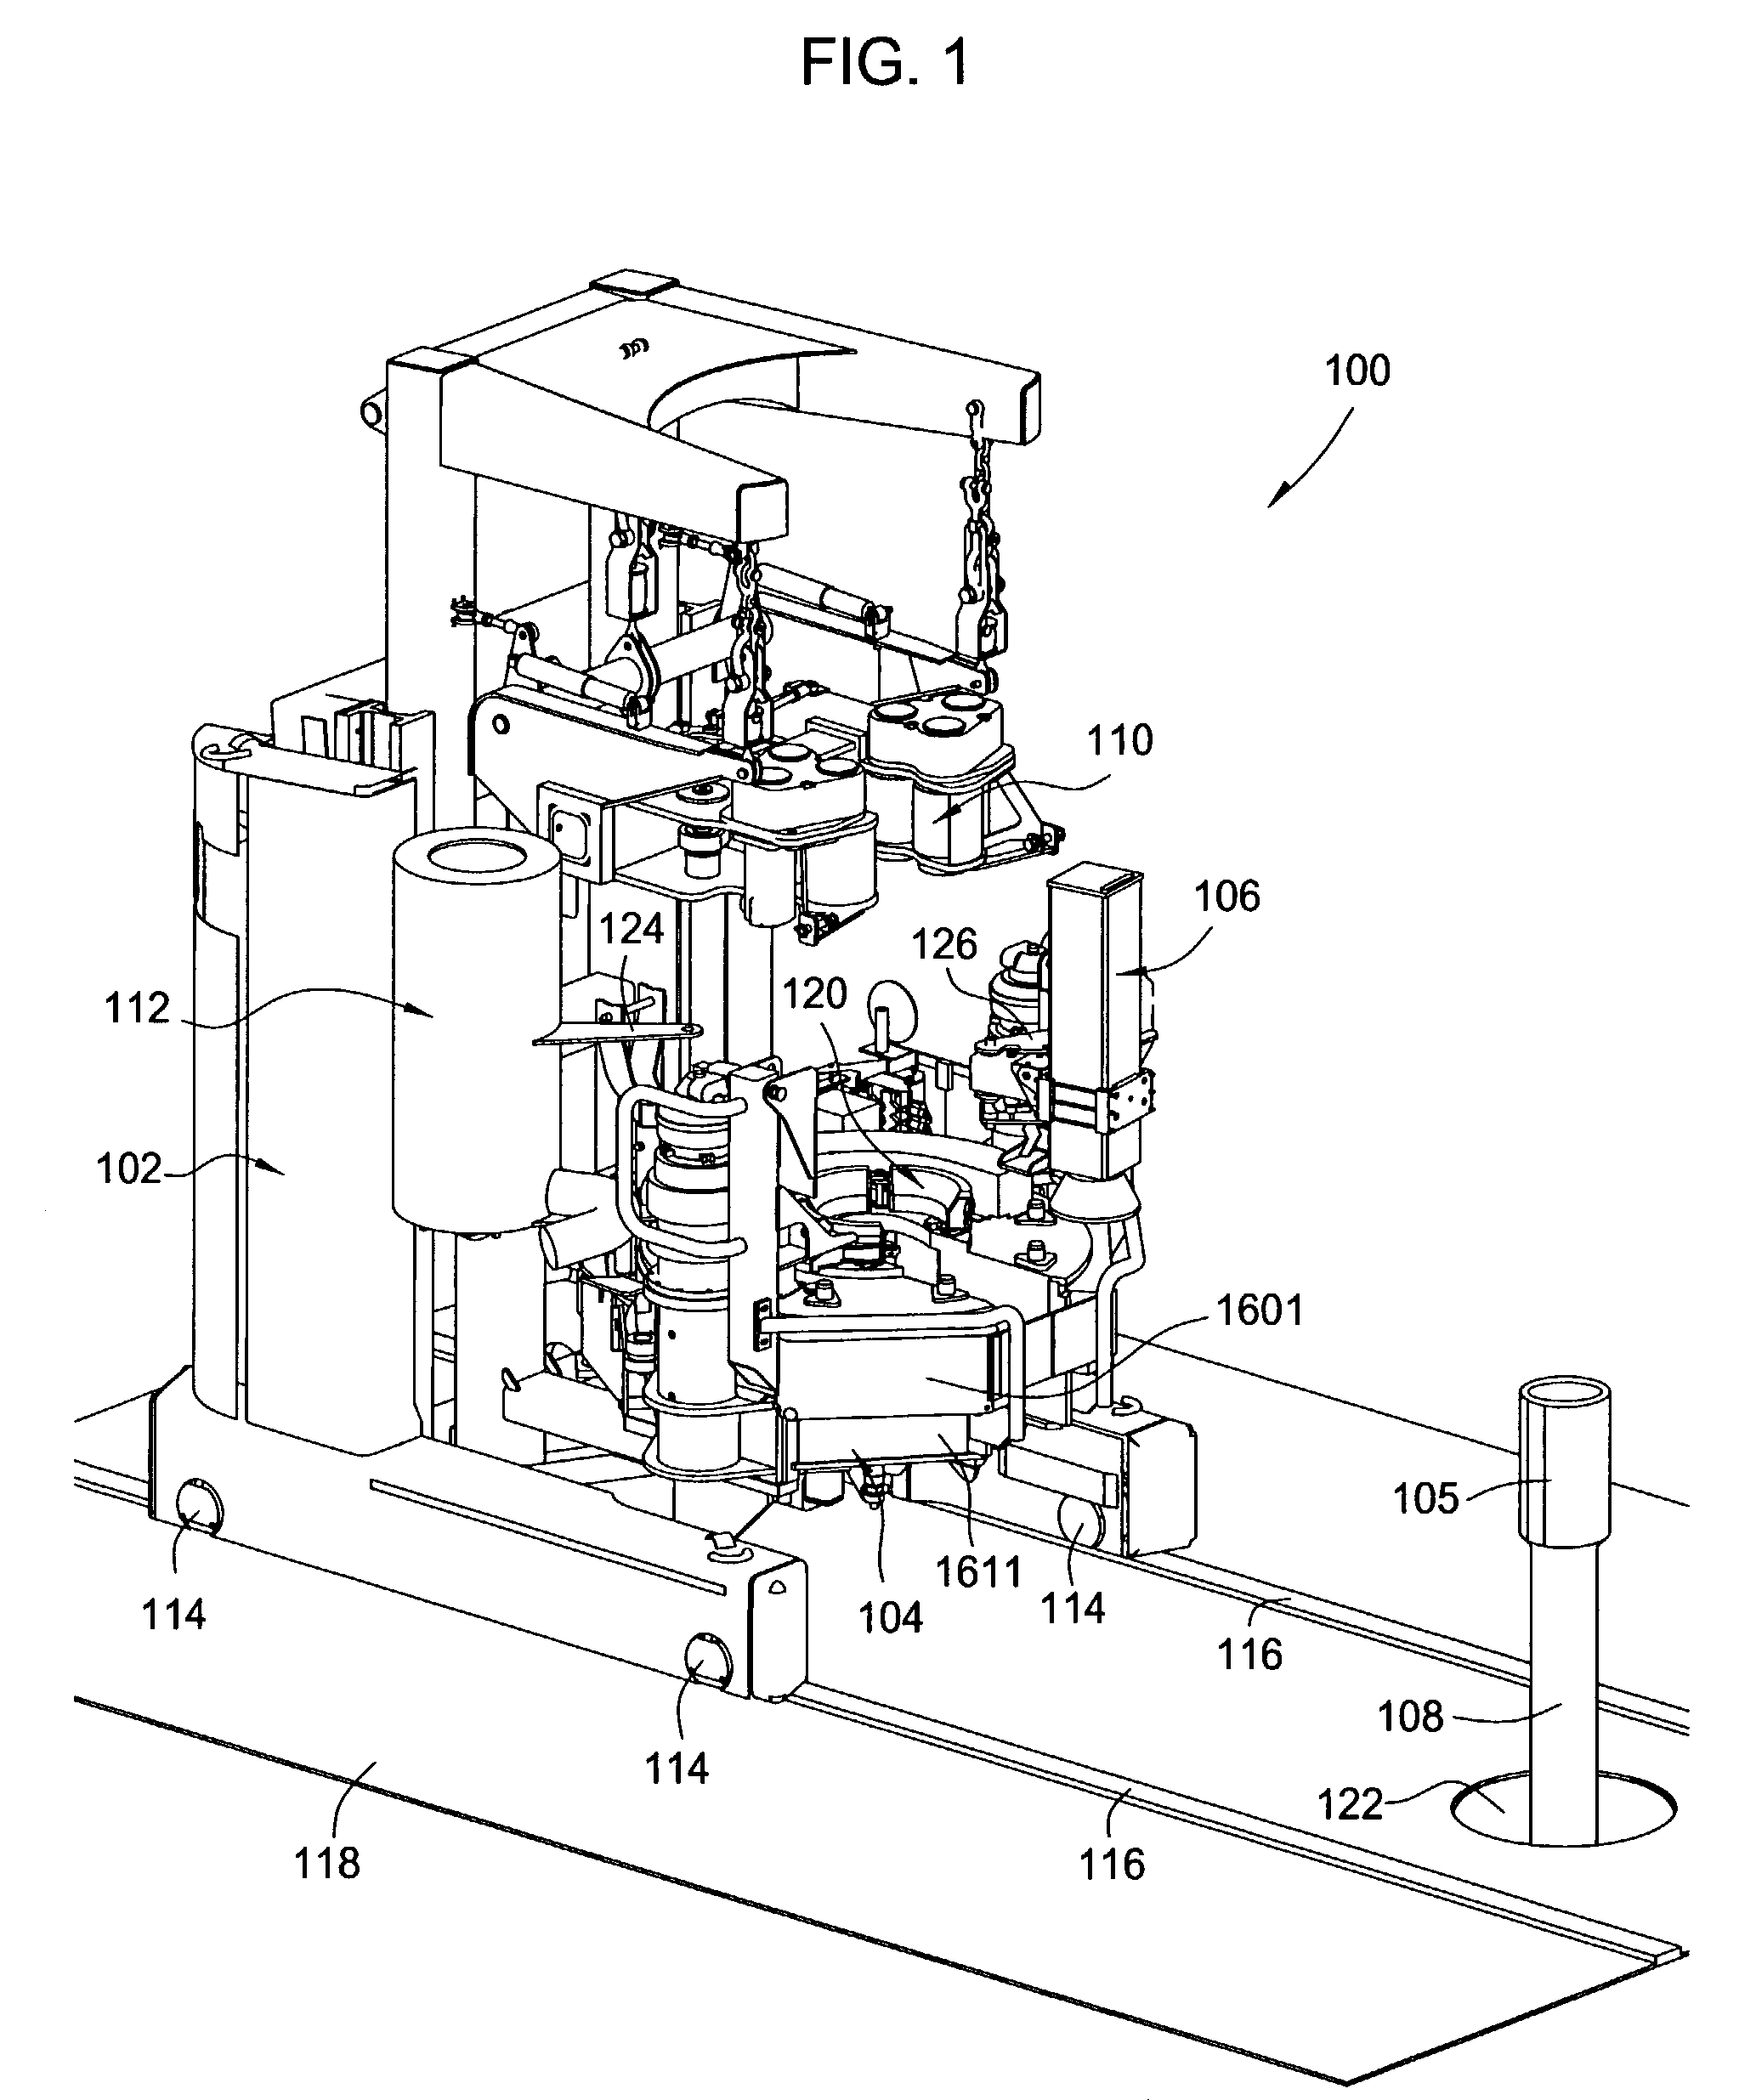 Automated pipe joining system and method